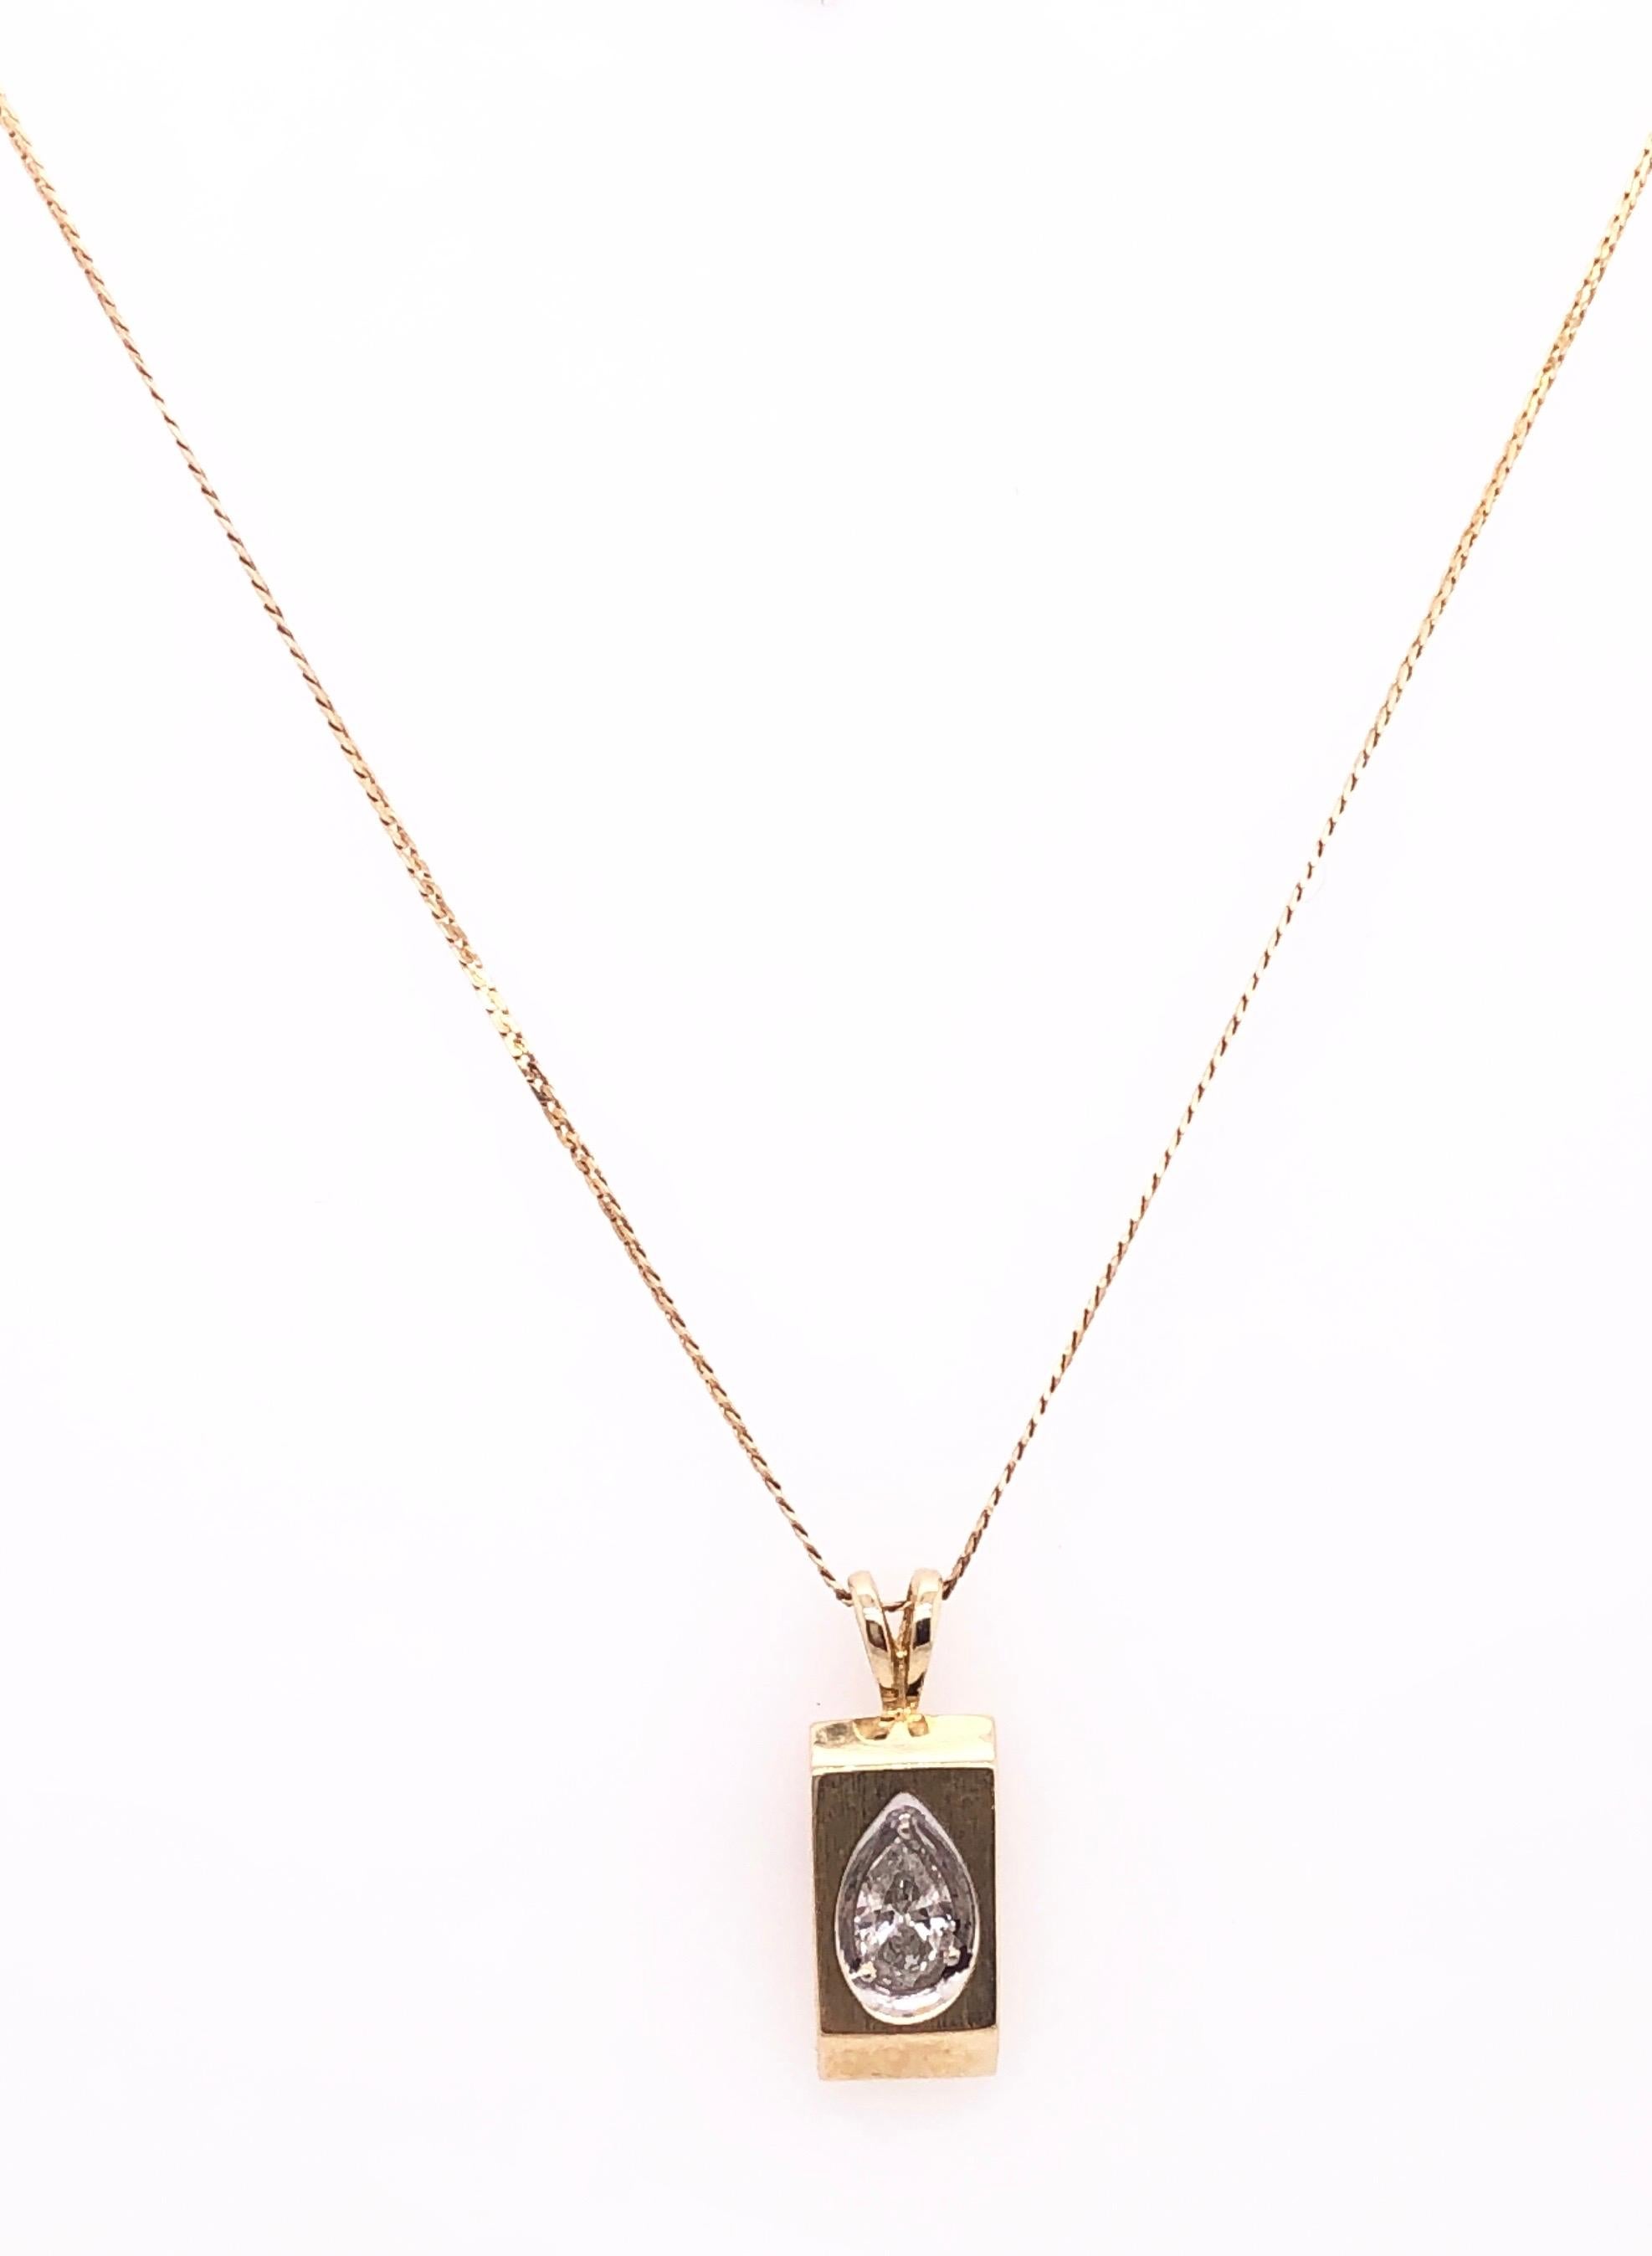 14 Karat Yellow Gold 16 Inch Pendant Necklace with center stone.
3.03 grams total weight.